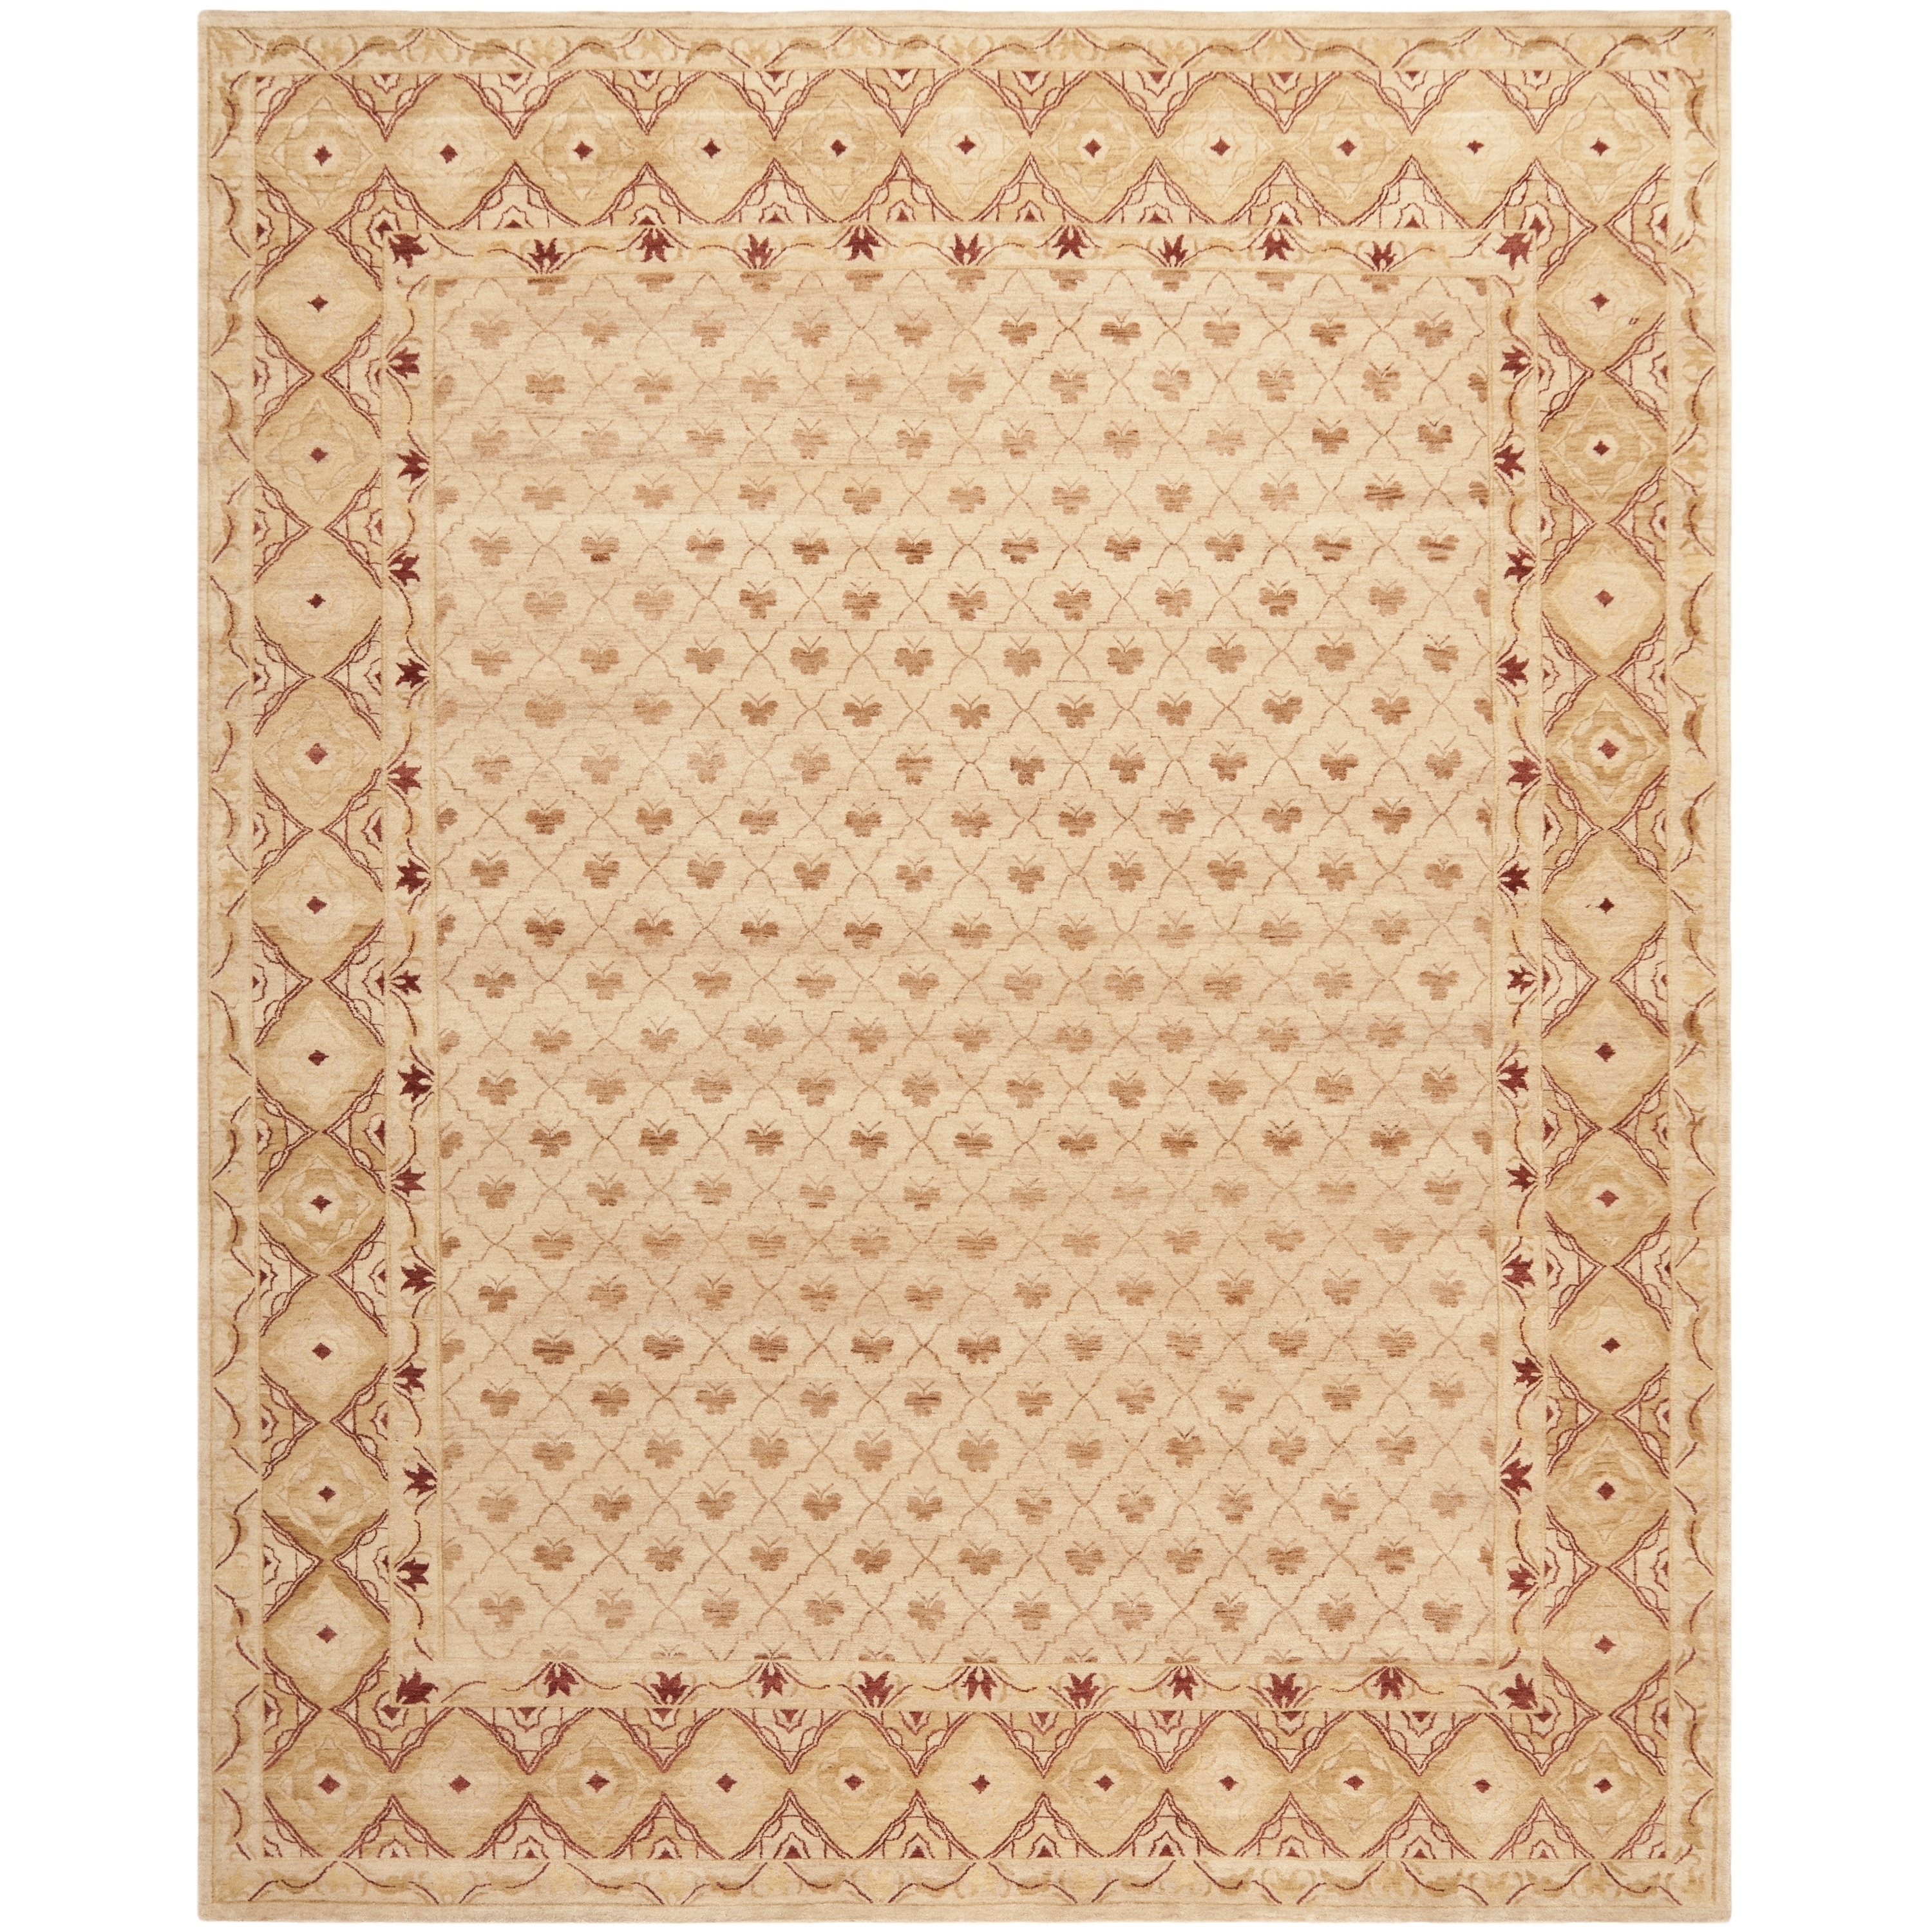 Safavieh Hand knotted Marrakech Ivory/ Red Wool Rug (6 X 9)